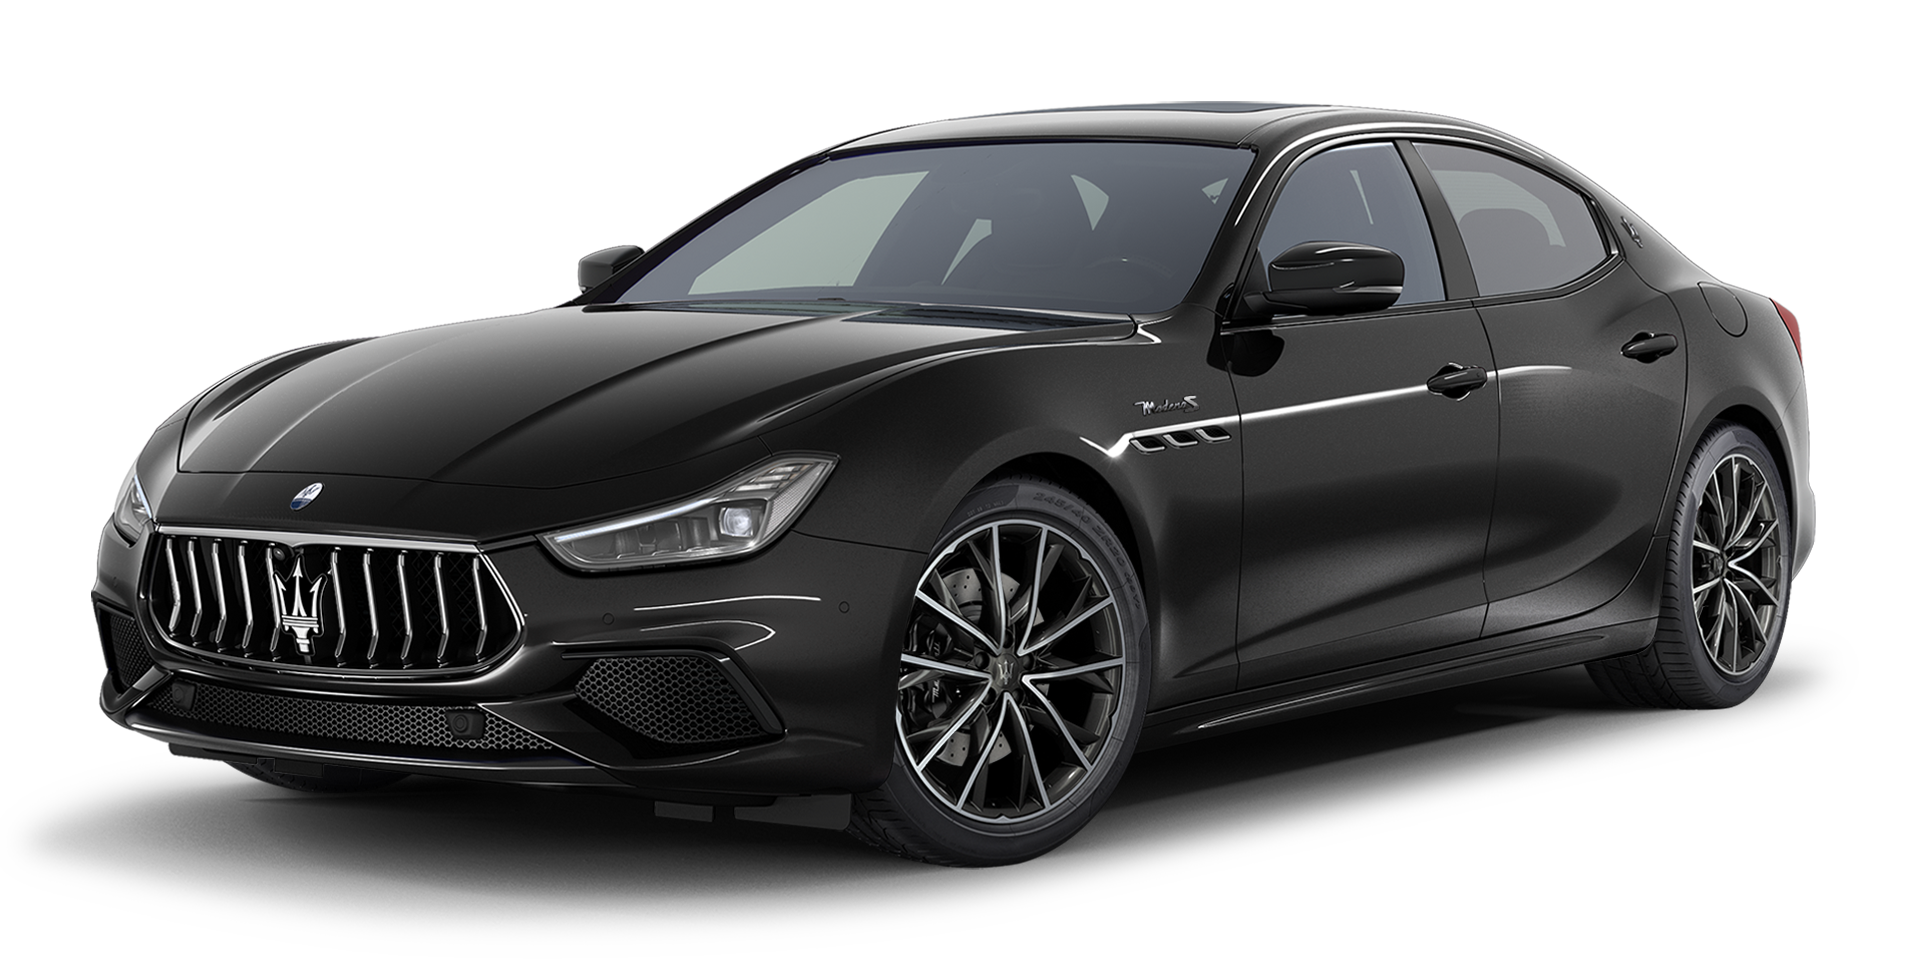 Maserati Ghibli Modena: sculpted forms and clean lines